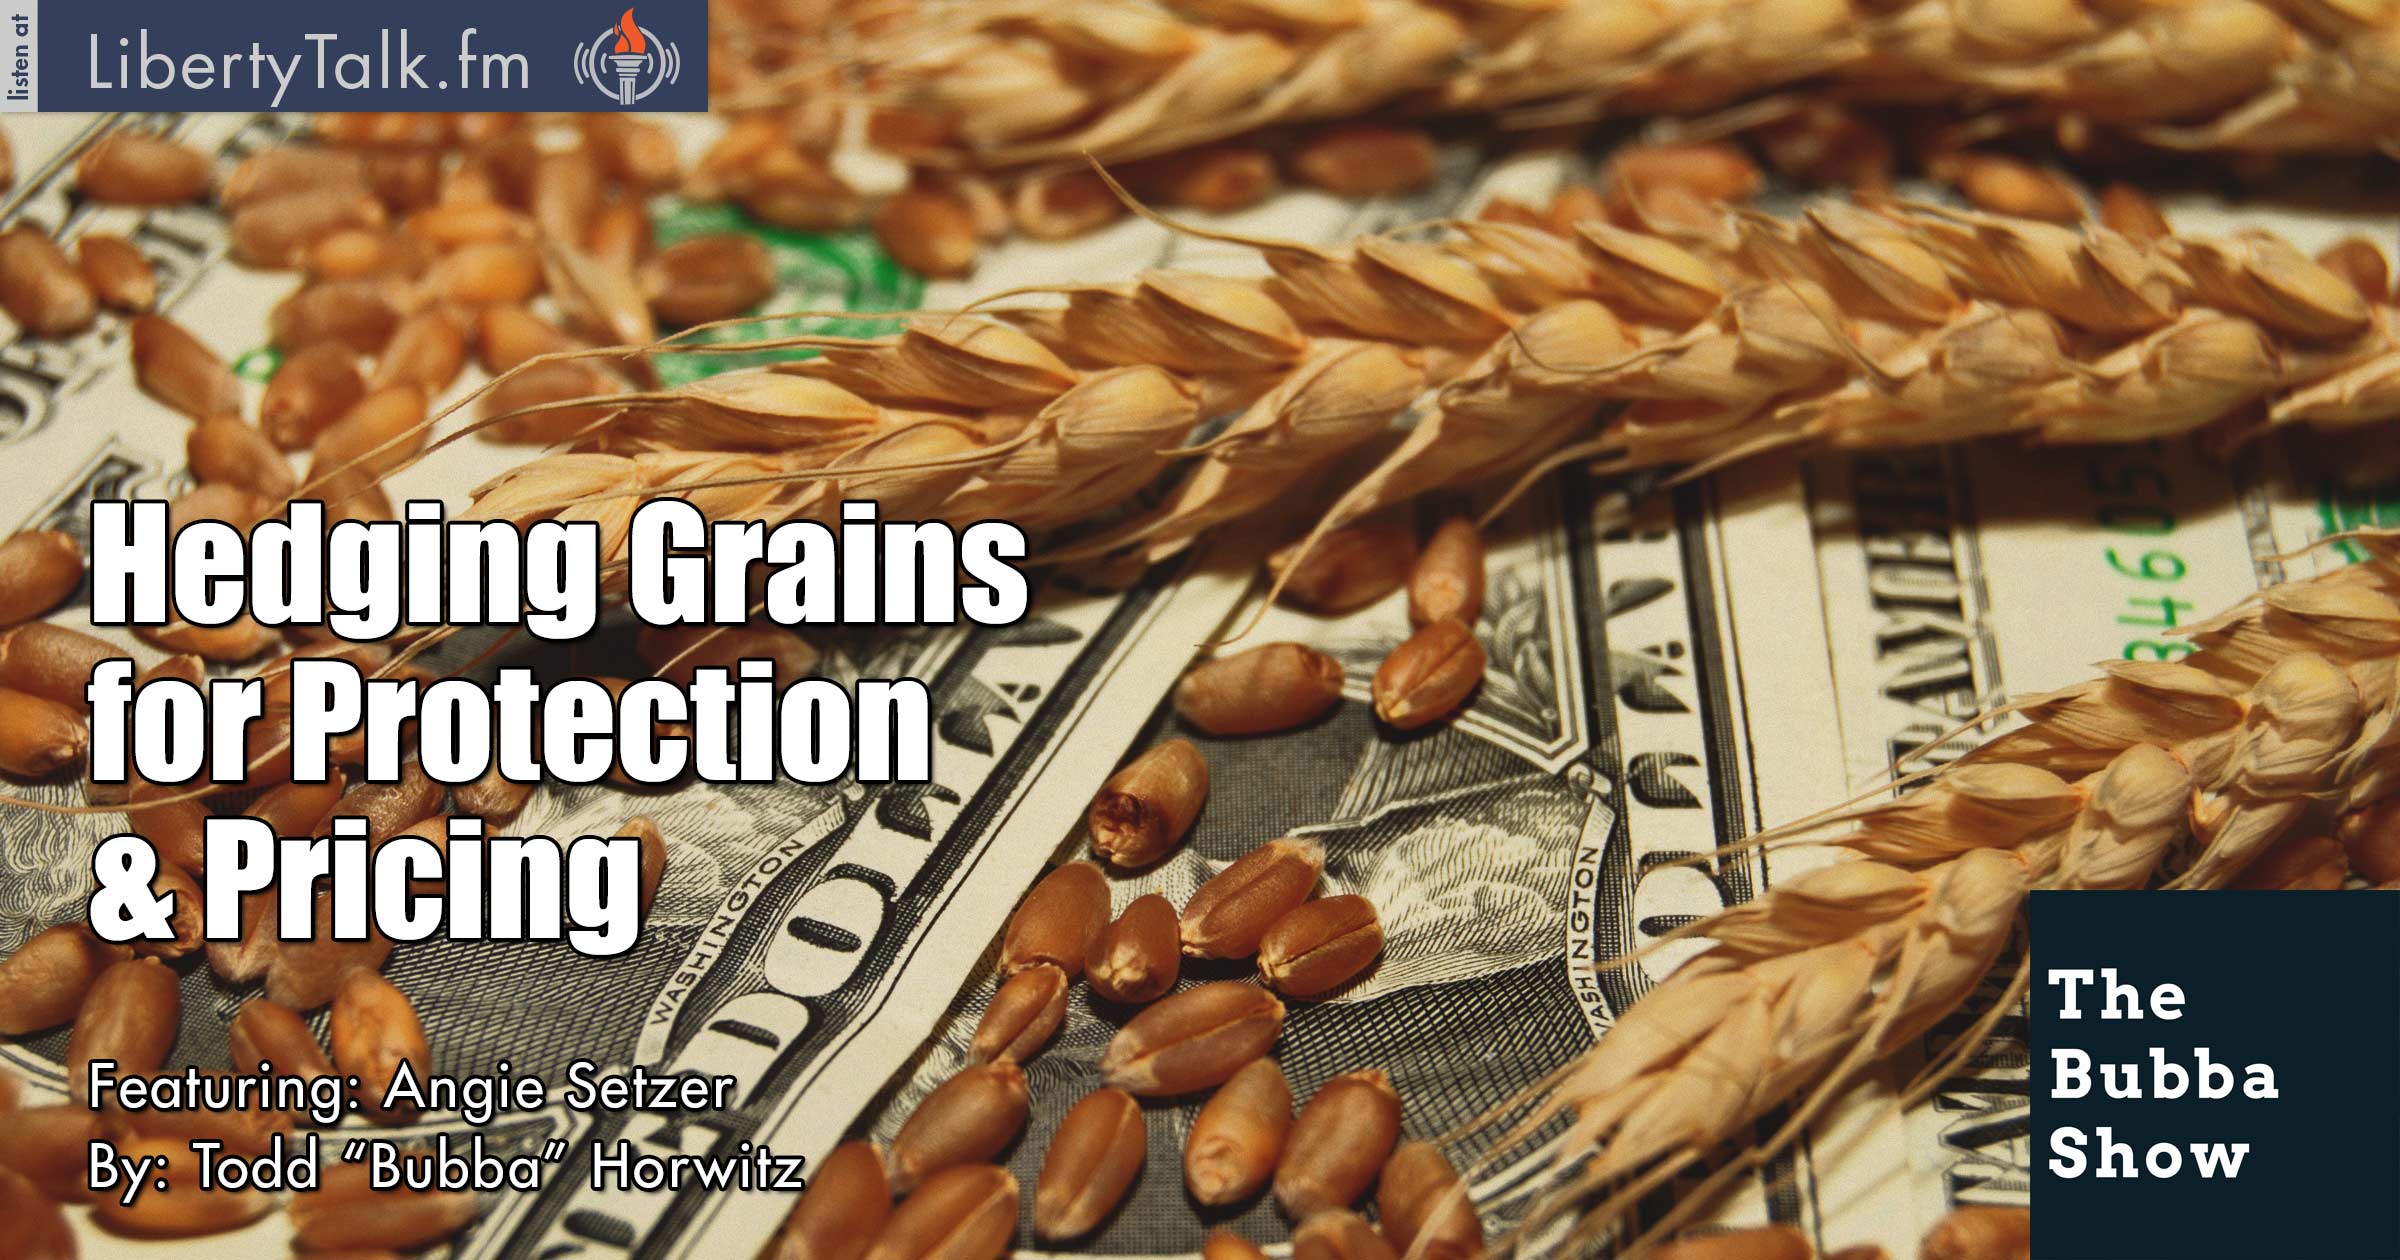 Hedging Grains for Protection and Pricing - The Bubba Show